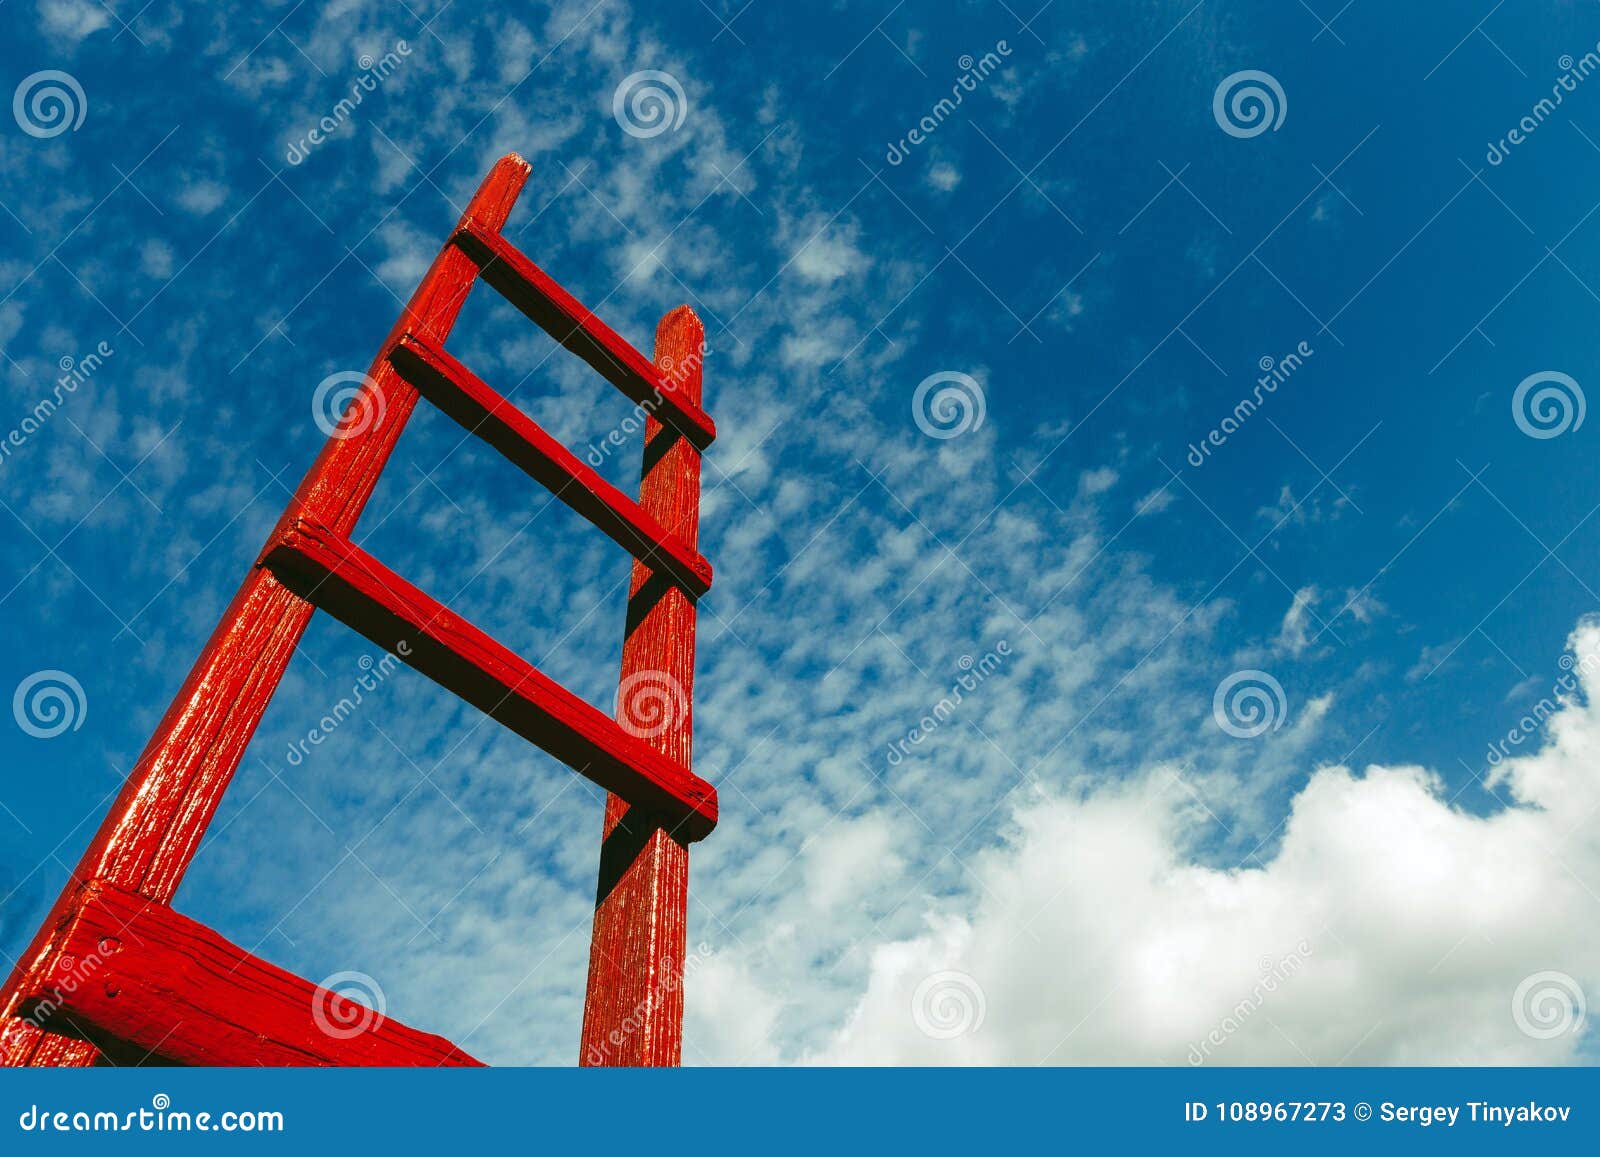 red wooden staircase against the blue sky. development motivation business career heaven growth concept